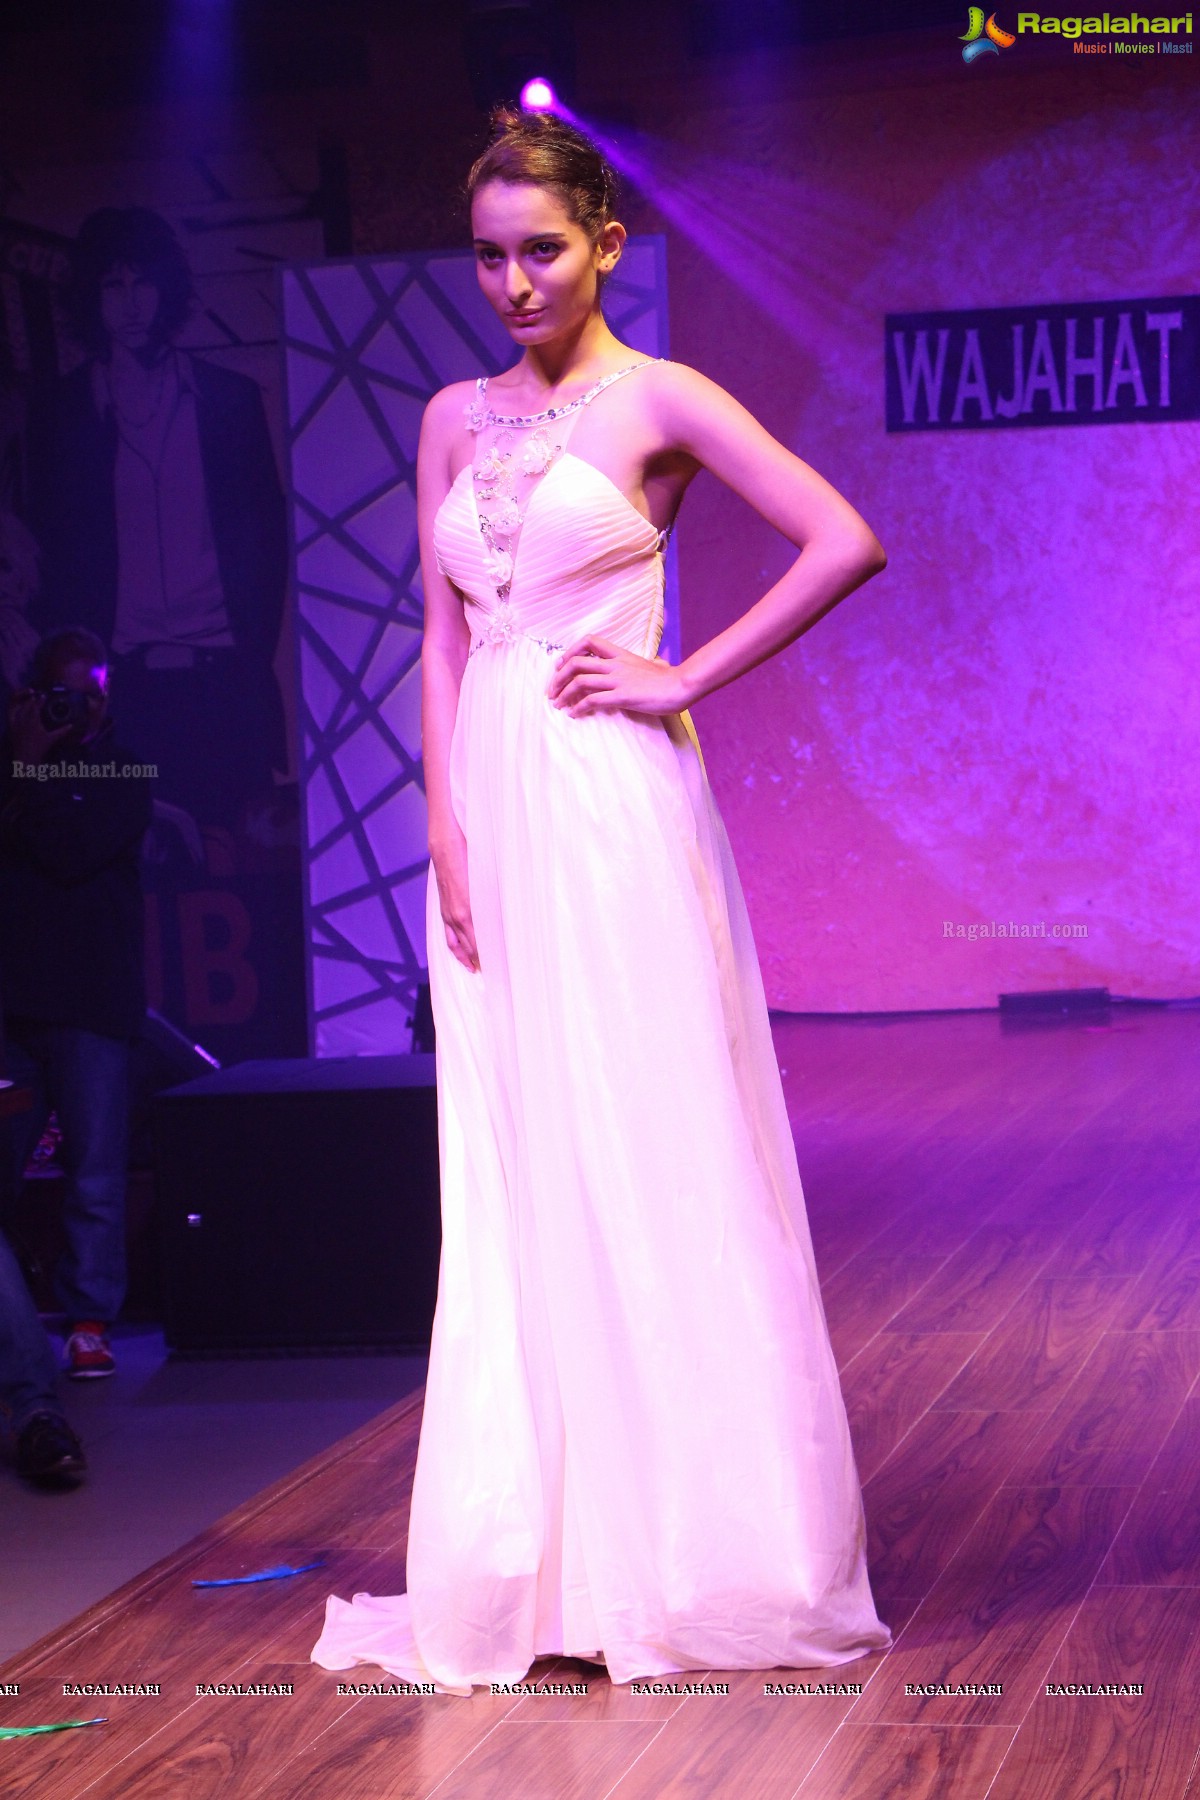 Fashion Fridays at Heart Cup Coffee - Showcase of Imperial Romance by Wajahat Mirza